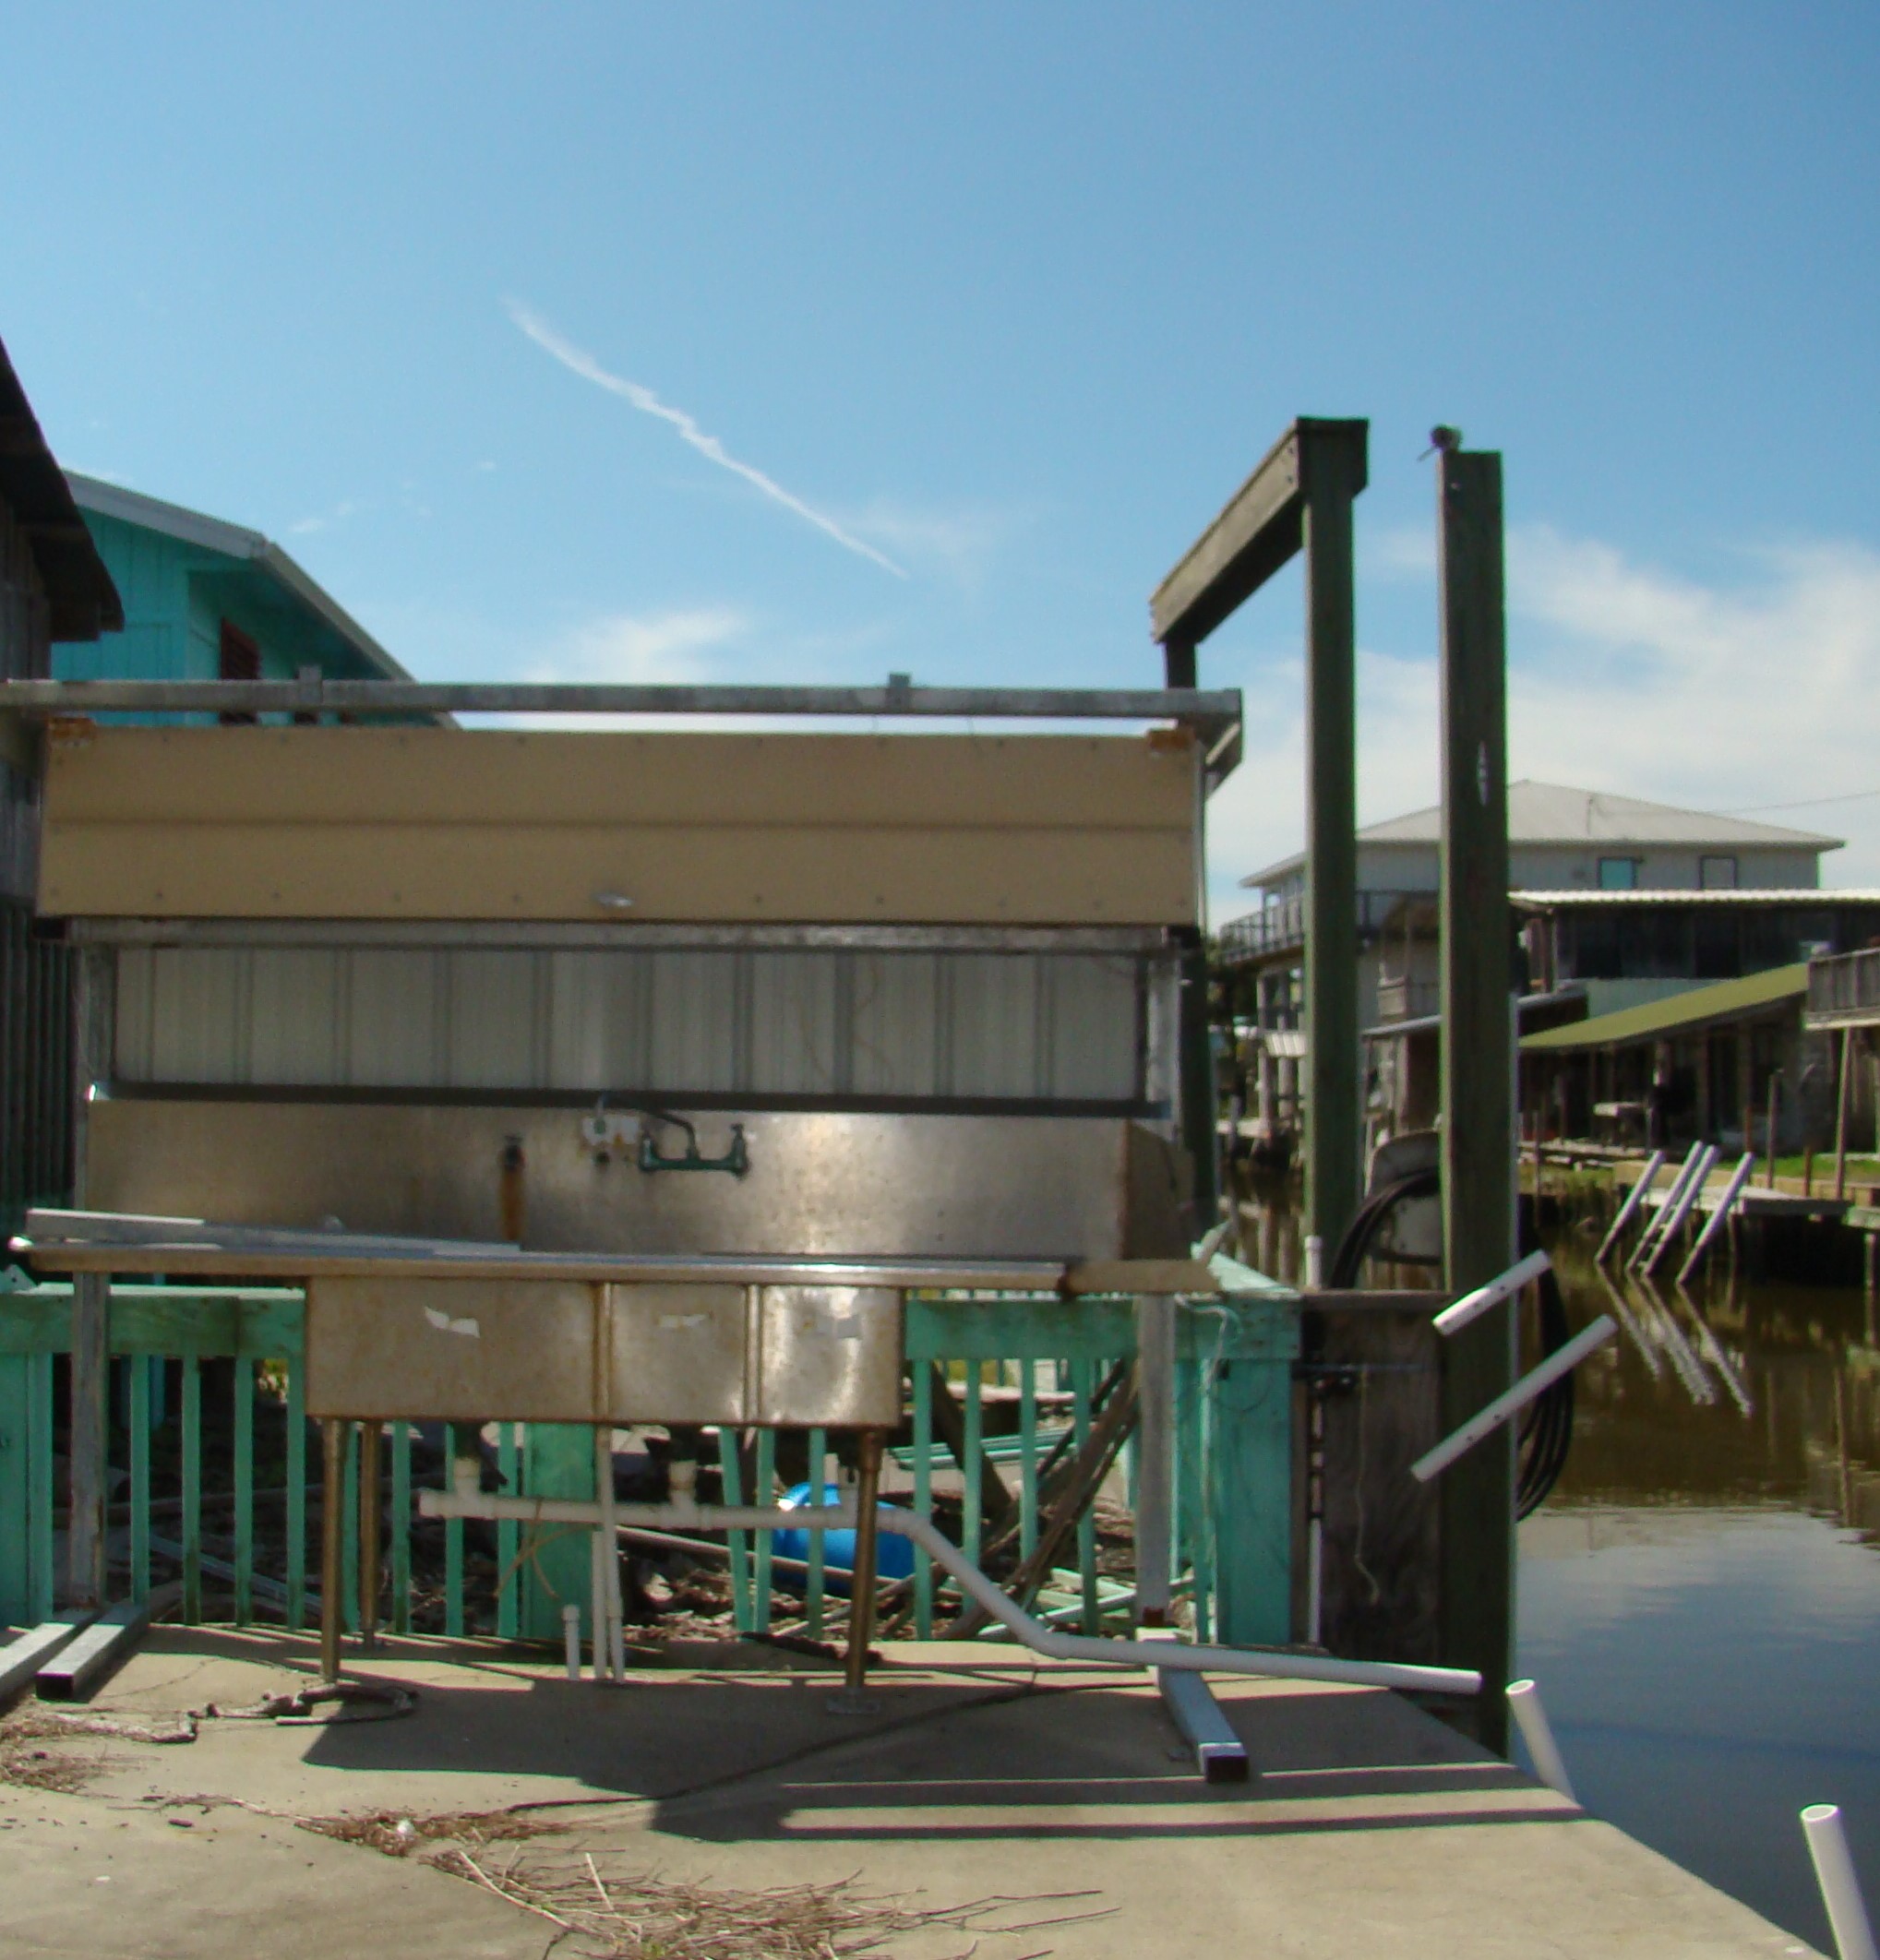 fish cleaning station - Florida Vacation Rentals - Horseshoe Beach Real Estate - Tammy Bryan